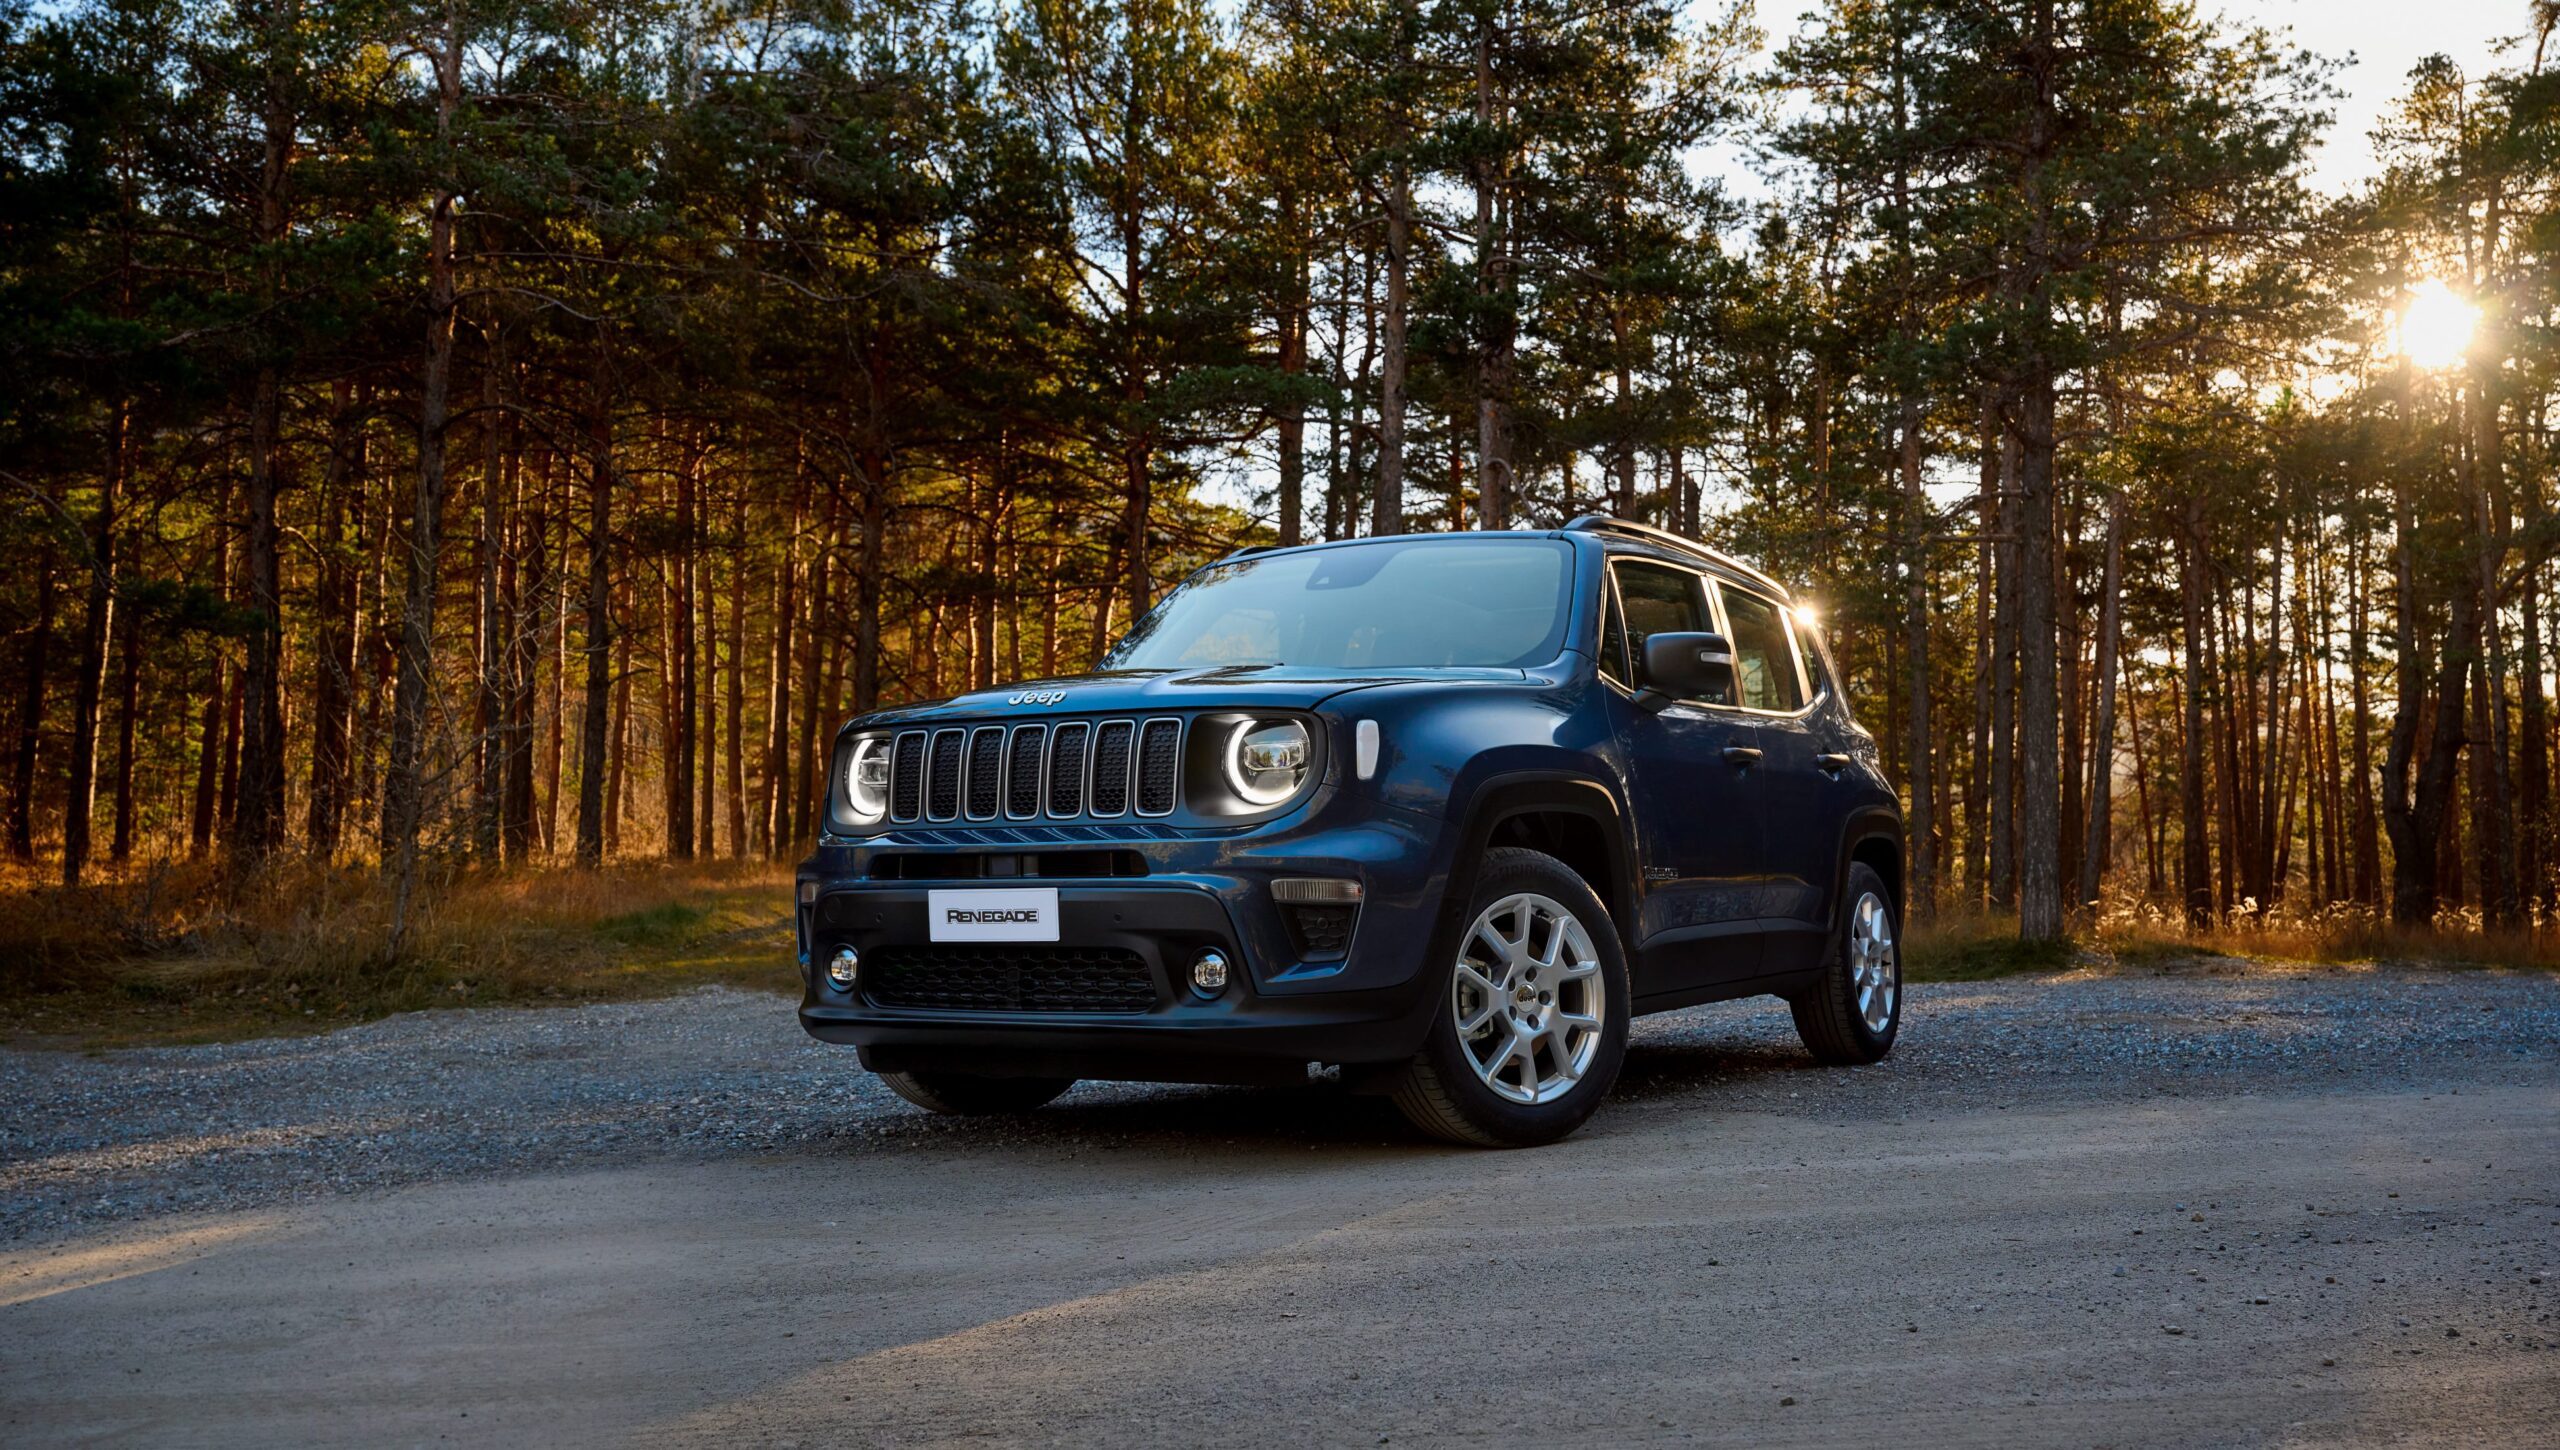 Front three quarters photo of a Jeep Renegade SUV in dark blue.